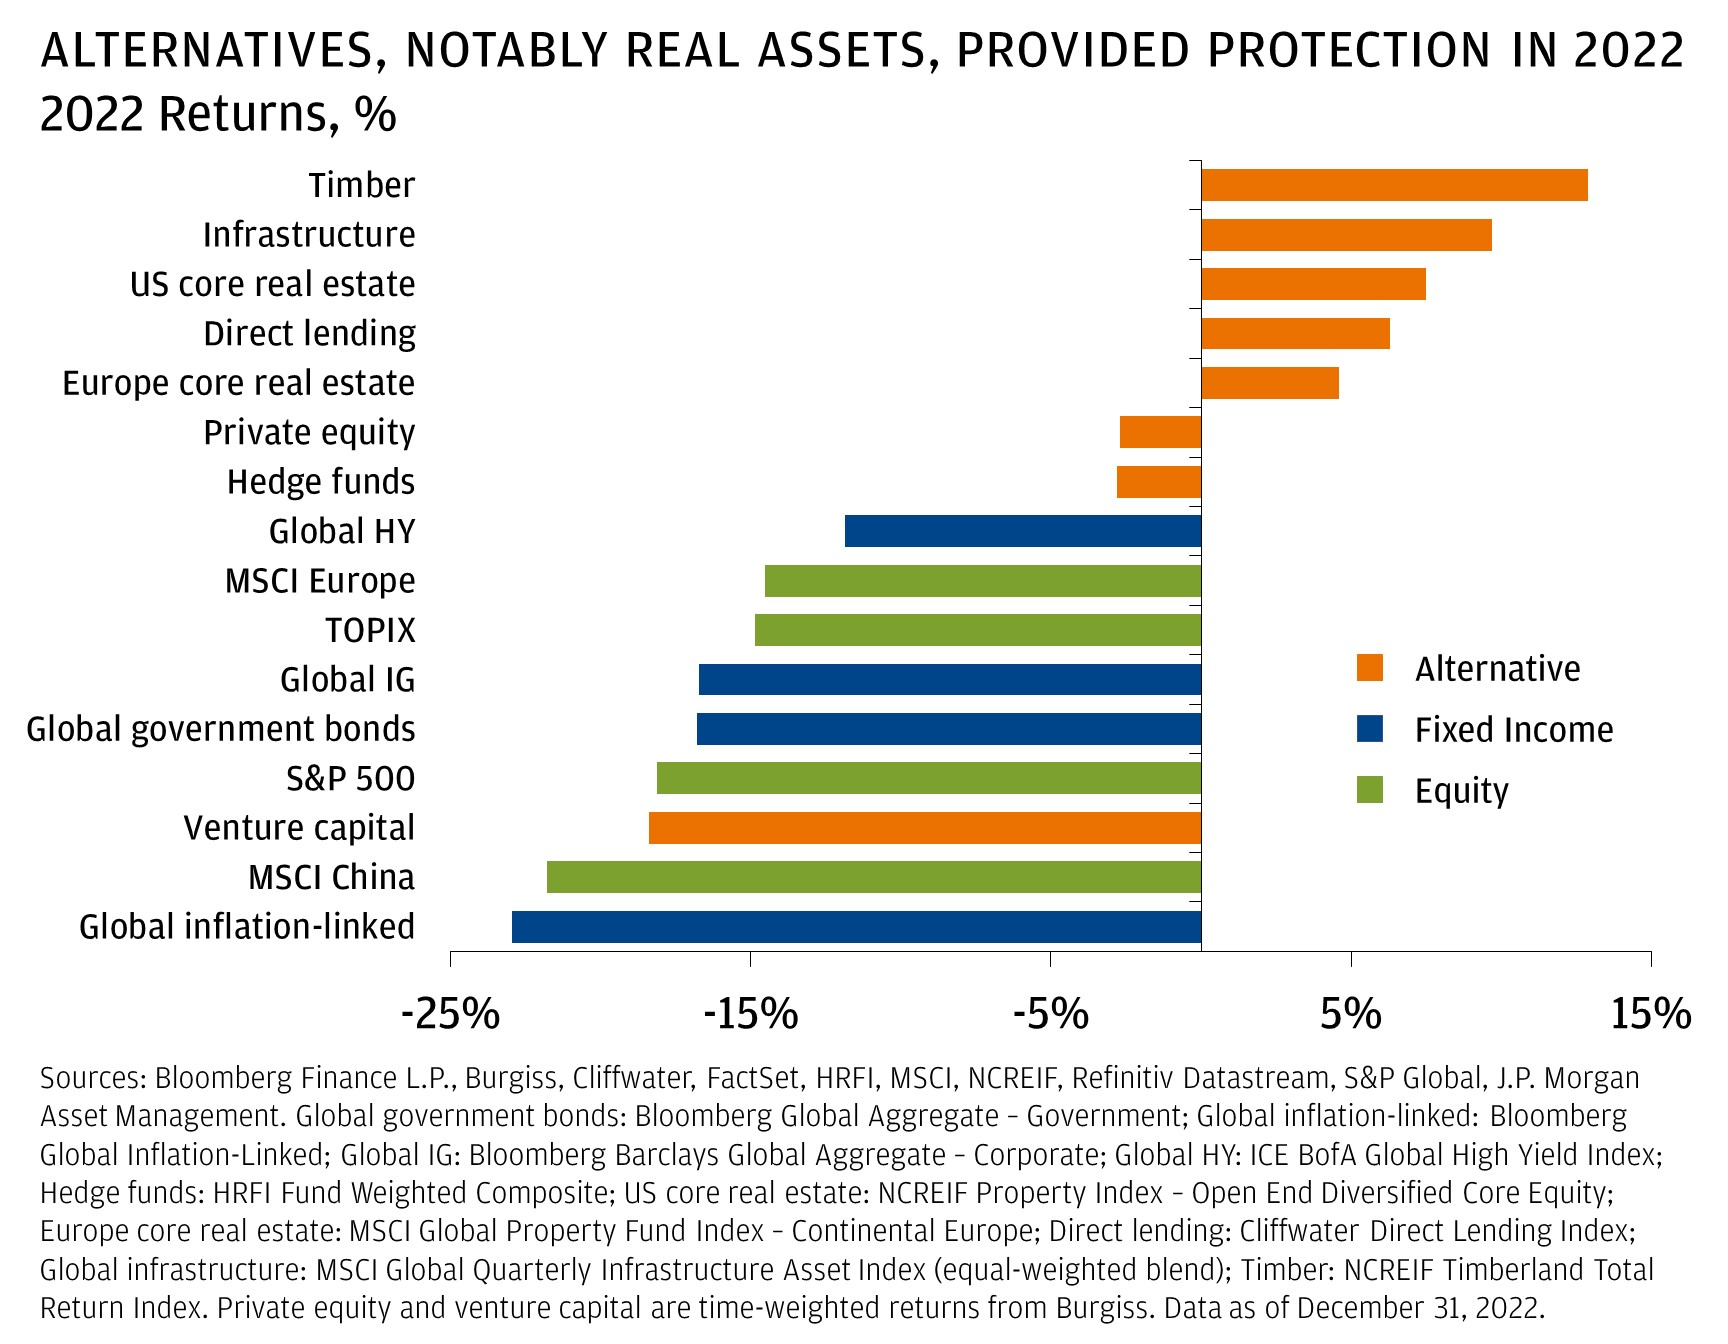 Alternatives, notably real assets, provided protection in 2022